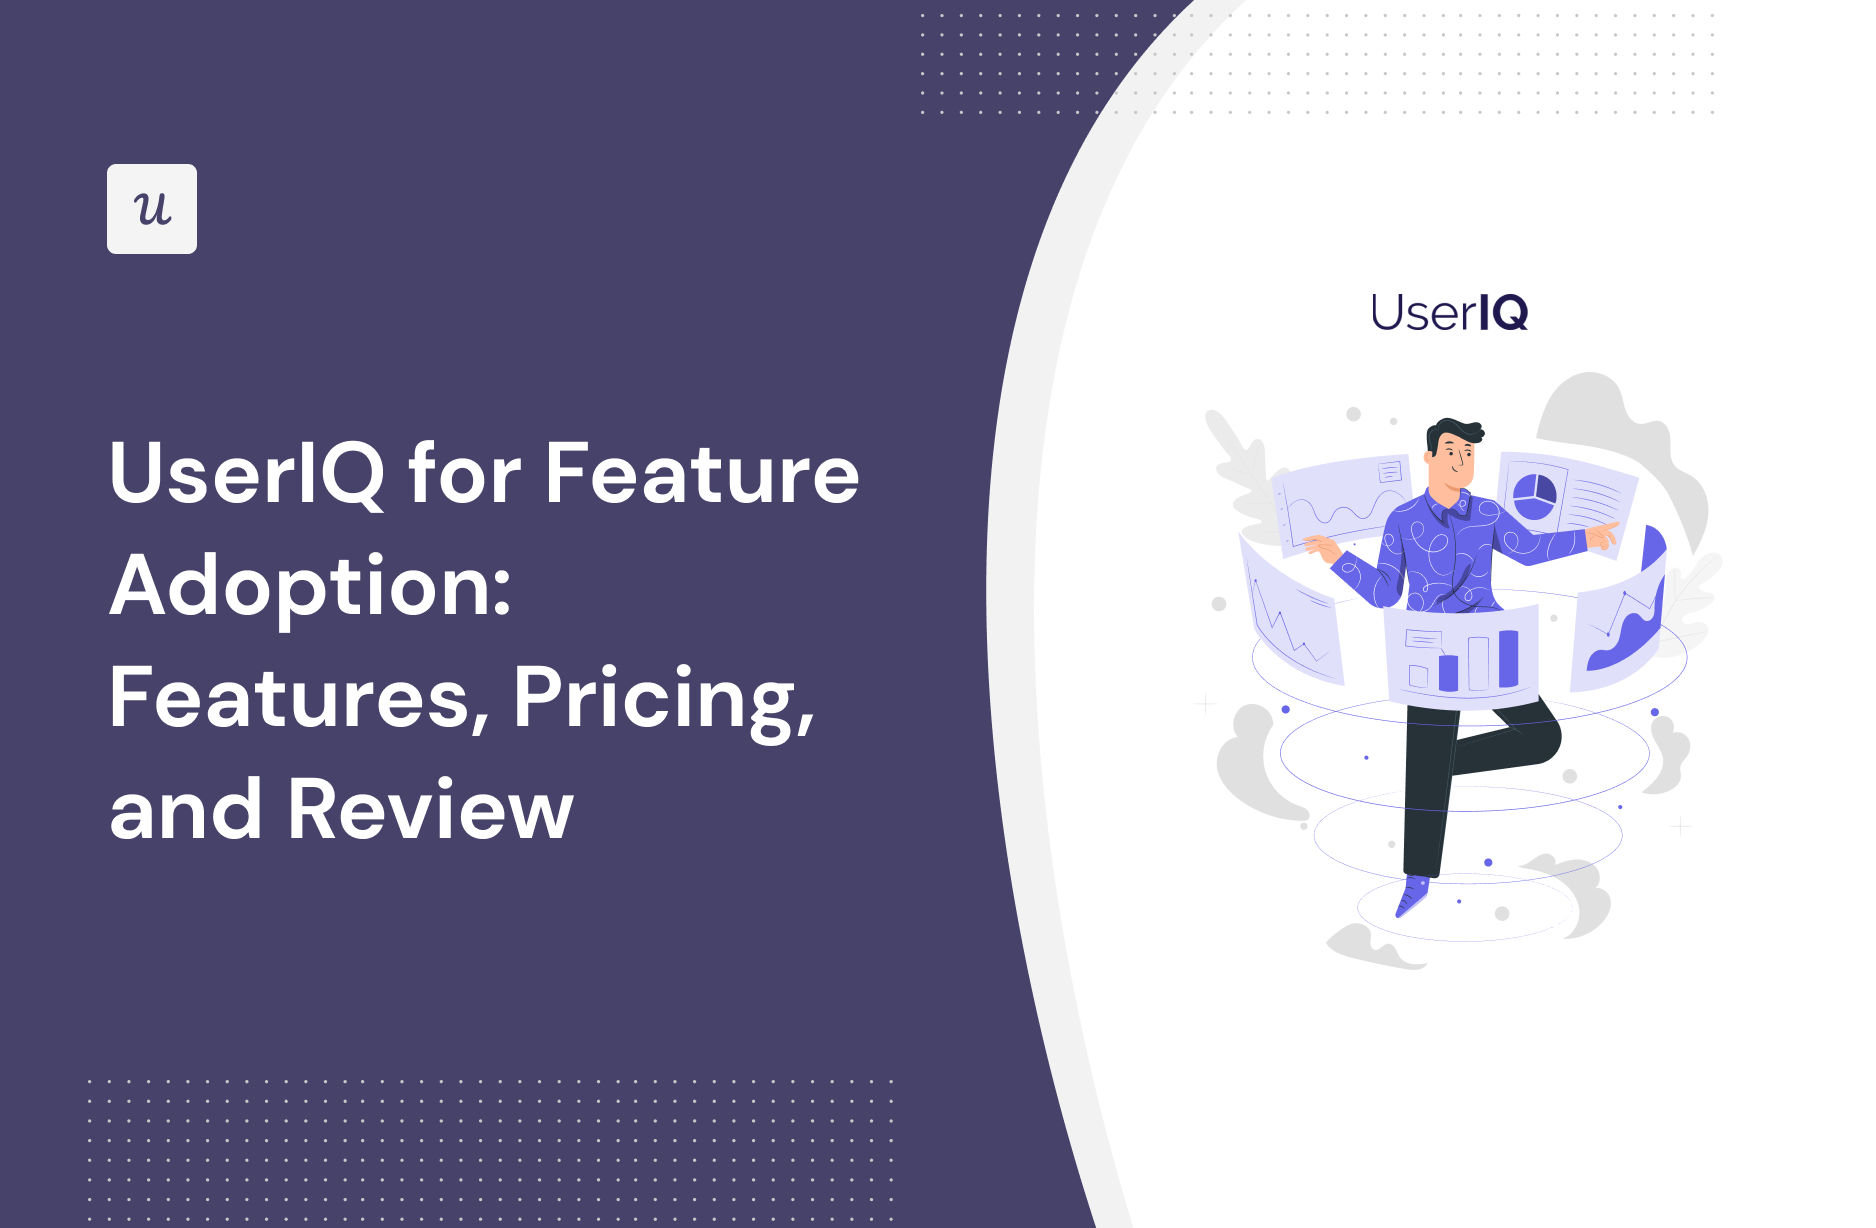 UserIQ for Feature Adoption: Features, Pricing, and Review